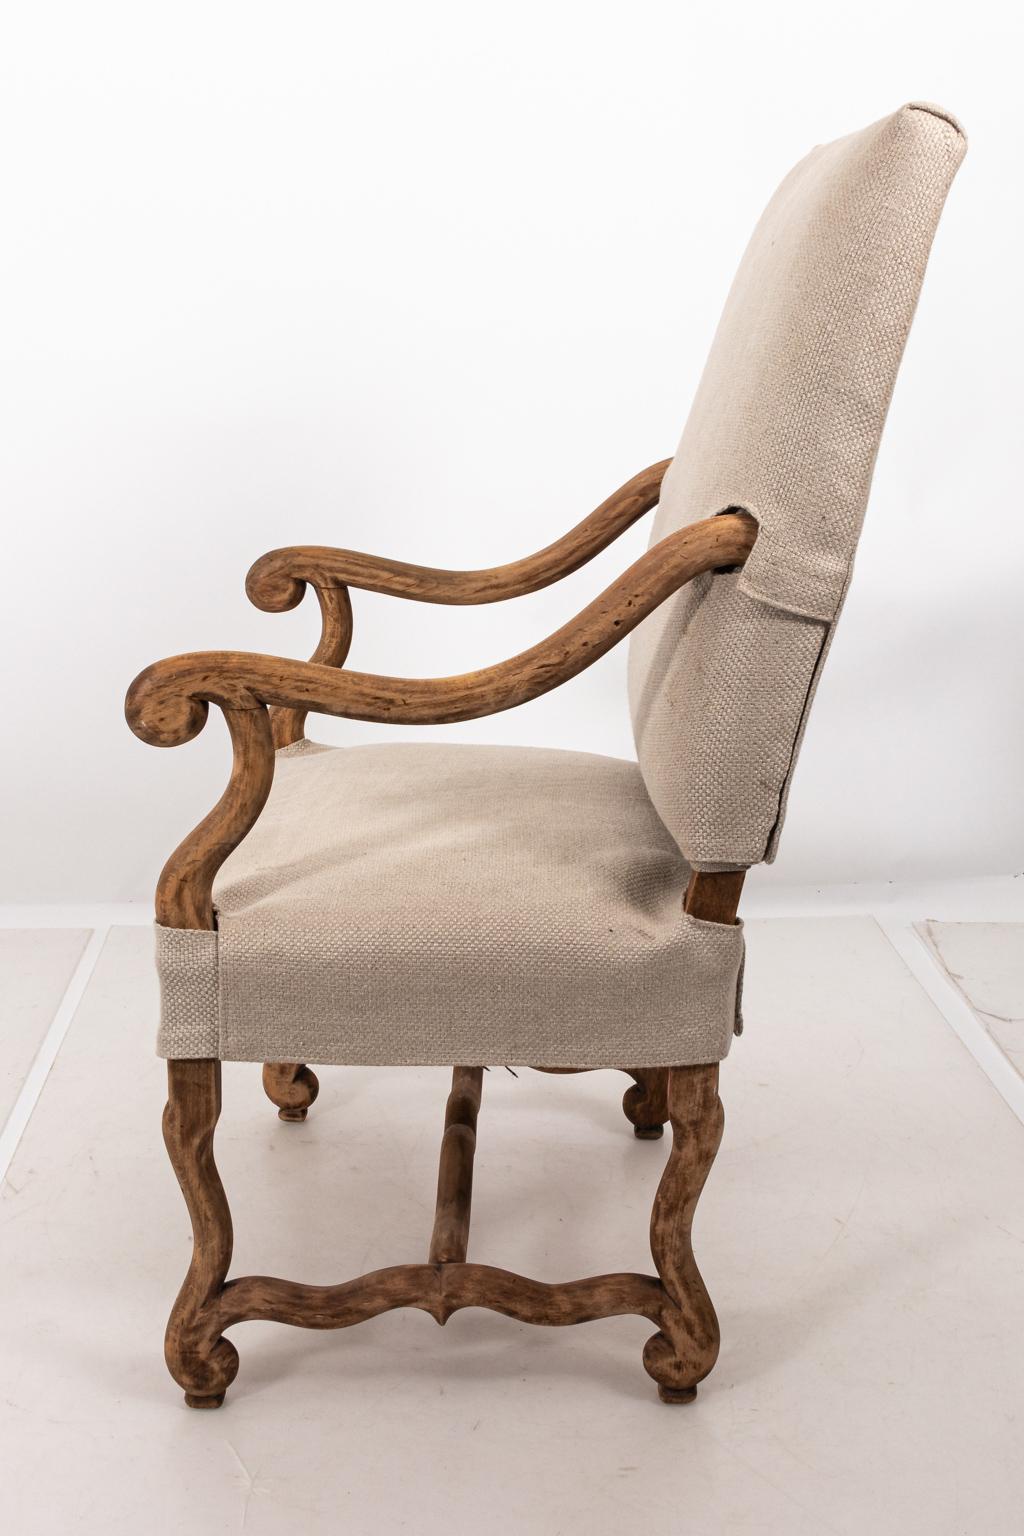 French Provencal style Os de Mouton armchair that features scrolled arms and tailored sand colored Belgian linen upholstery with slip cover, circa mid-20th century. Please note of wear consistent with age including minor evidence of finish loss on